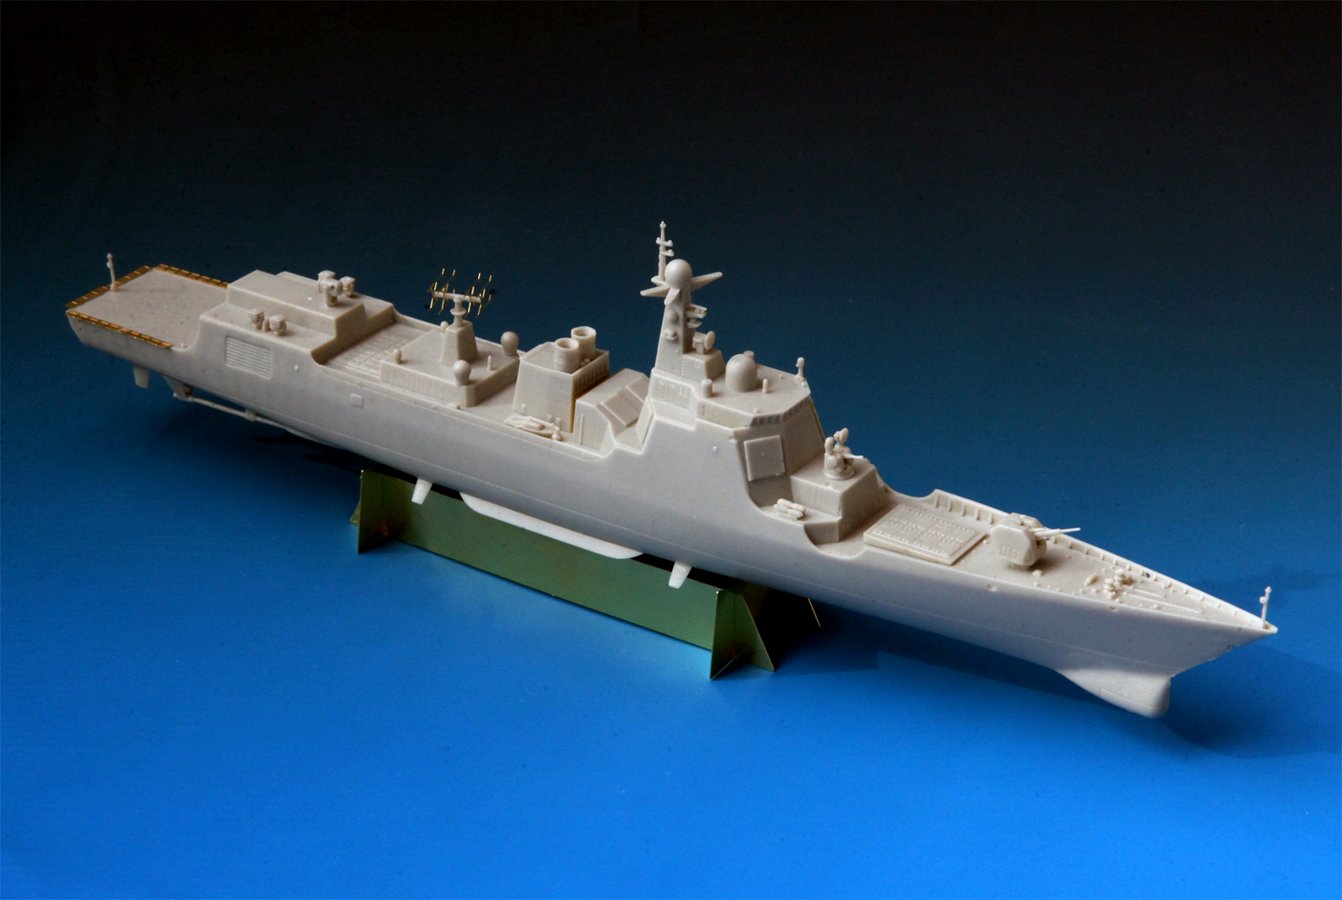 1/700 Chinese PLA Type 052C & 052D Class Destroyer (2 Ship Kit) - Click Image to Close